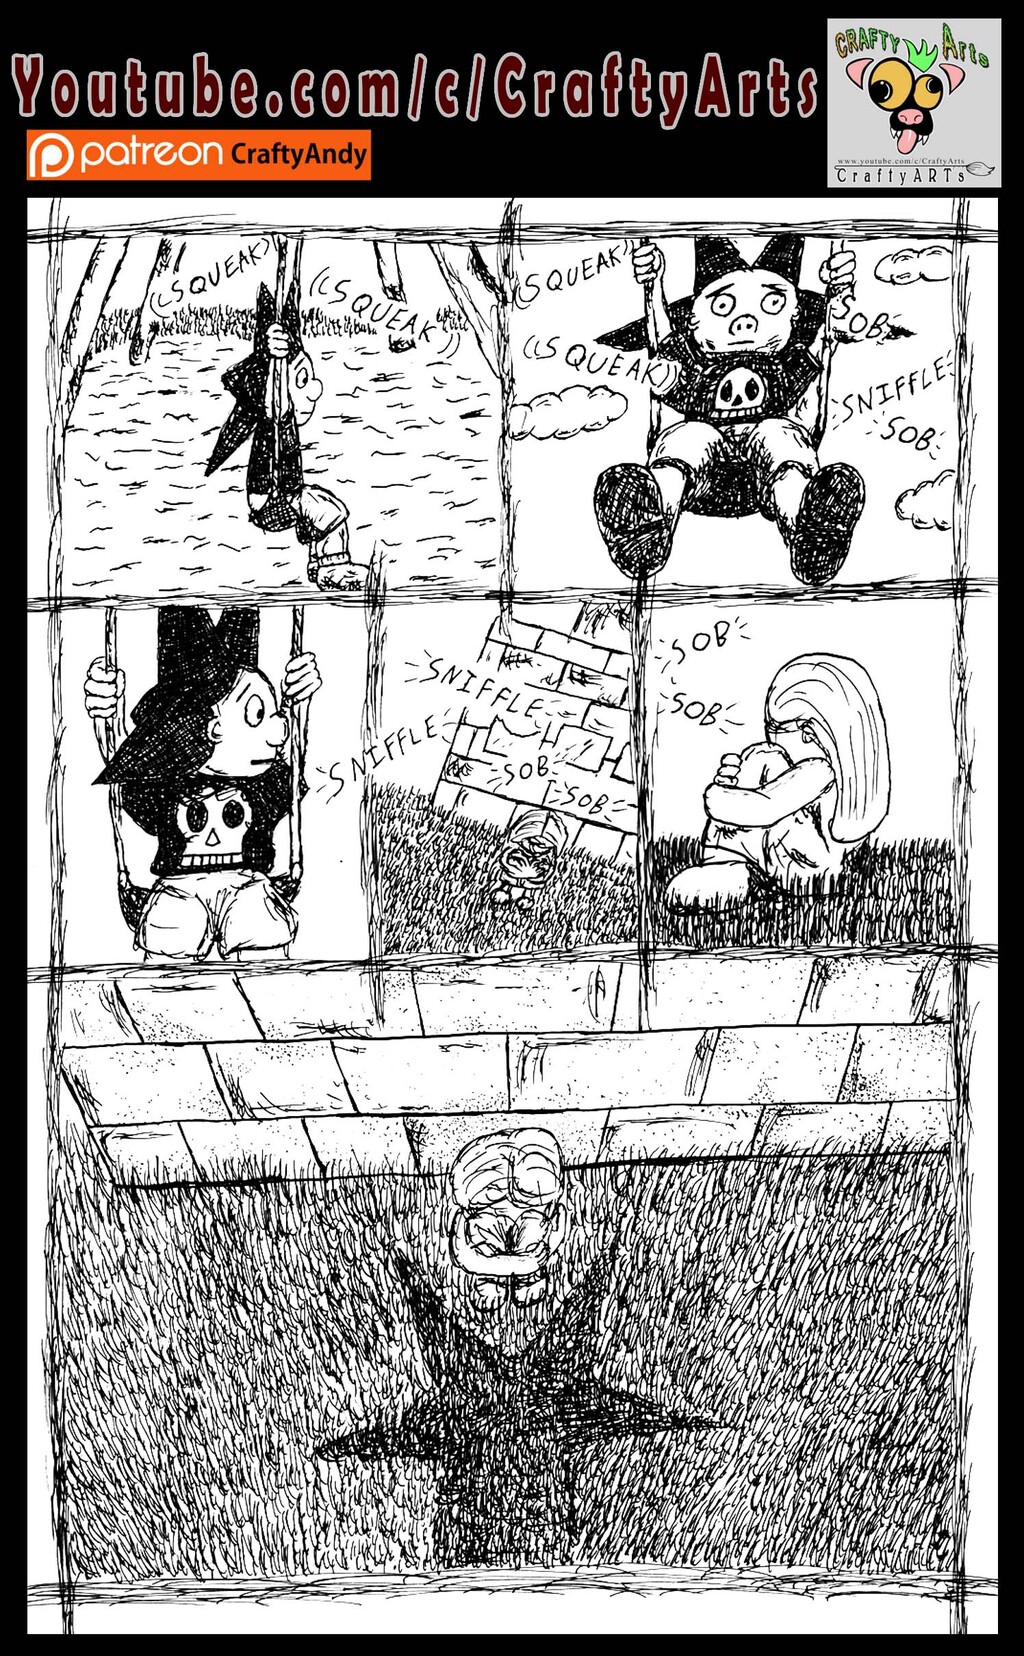 Skull Kid V1 Page 9 of 13 By CraftyAndy